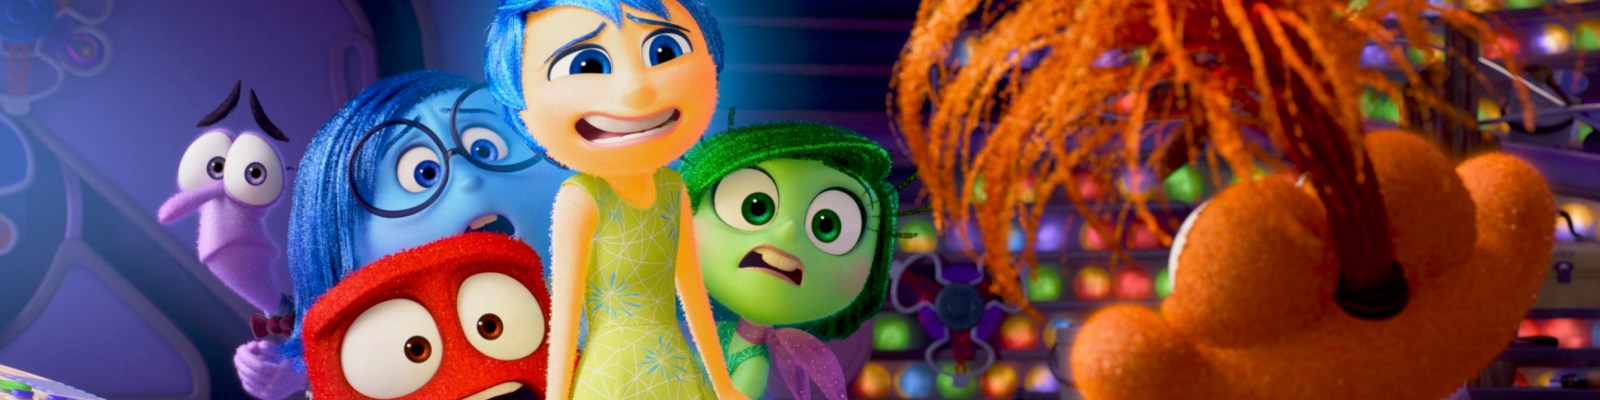 ‘Inside Out 2’: Everything To Know About The Pixar Sequel Including The New Emotions And Concept Art